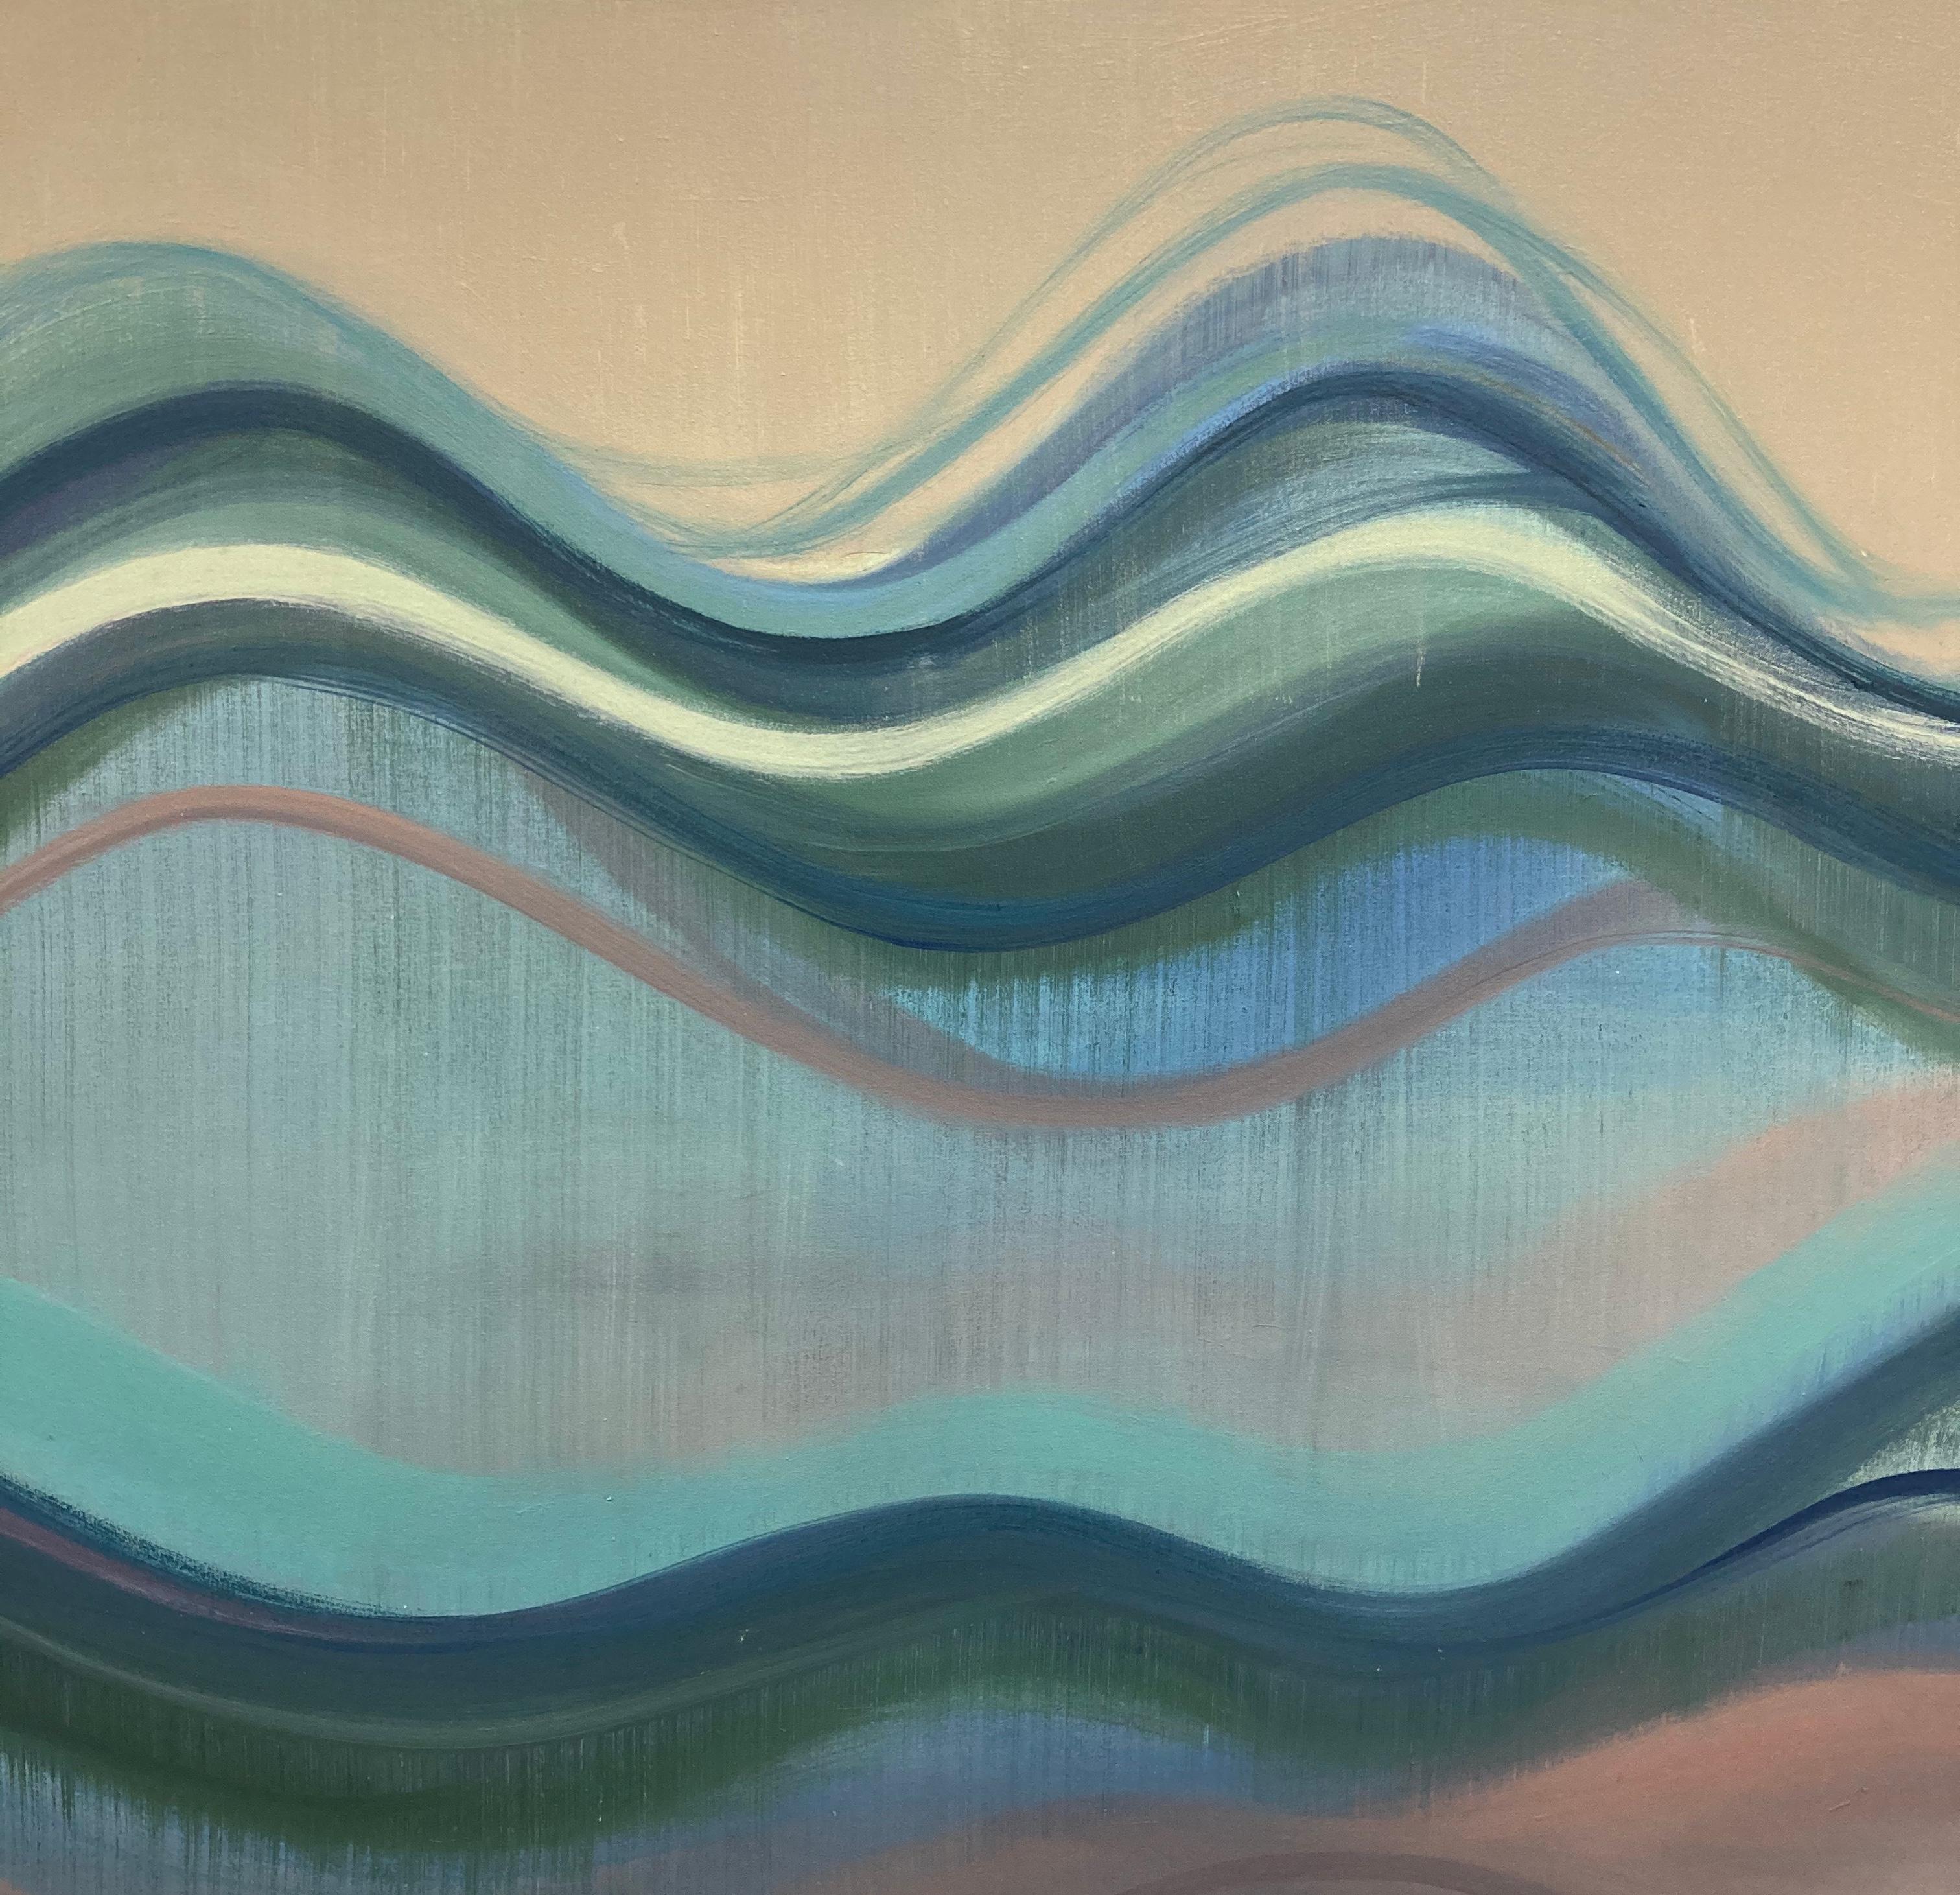 Through undulations in shades of blue with pale peach, coral, ivory and hunter green, Margaret Neill explores the properties of abstract curvilinear forms found in the localized conditions of her surrounding environment. This experience is